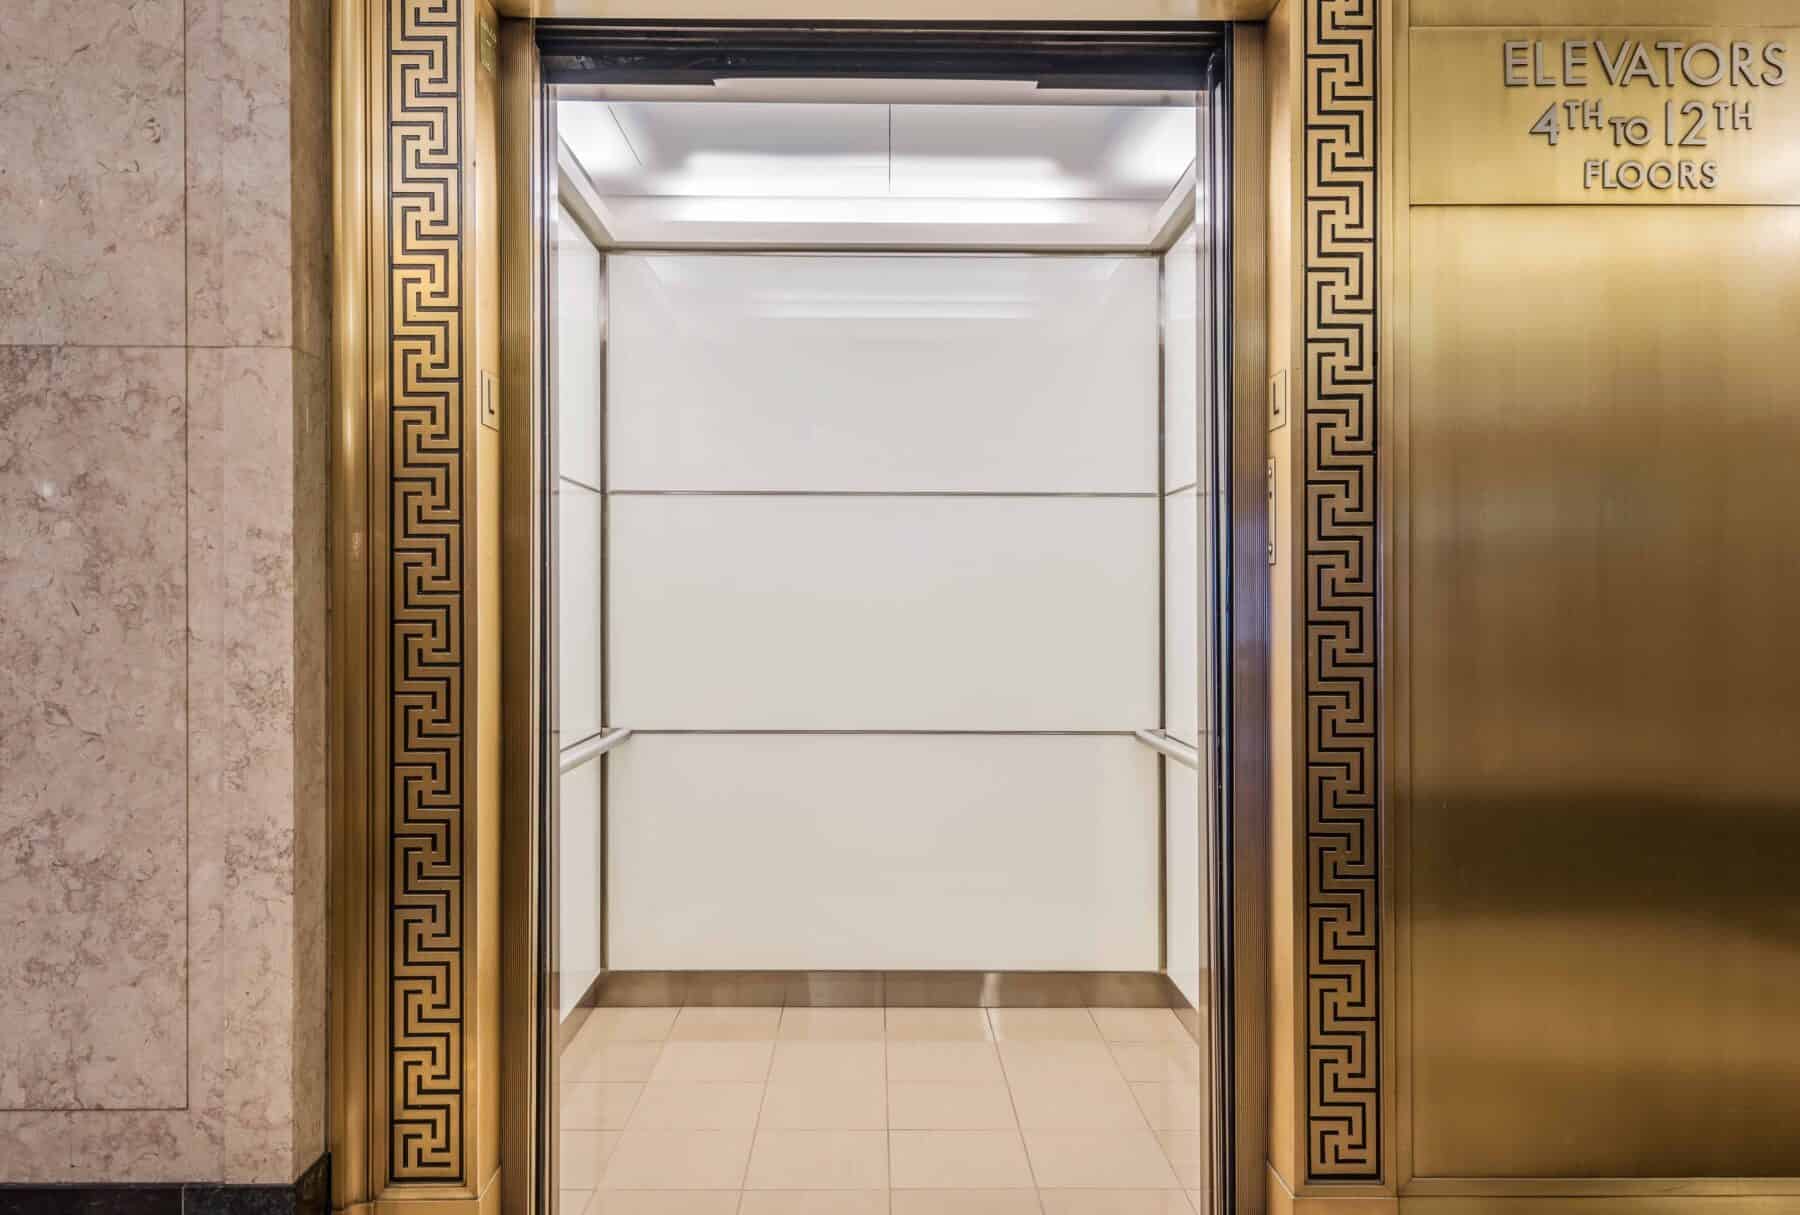 Custom Elevator Interior with Back Painted Glass Wall Panels and LED Ceiling Lights for Burnham Center Remodel by Commercial Builder & General Contractor Structural Enterprises